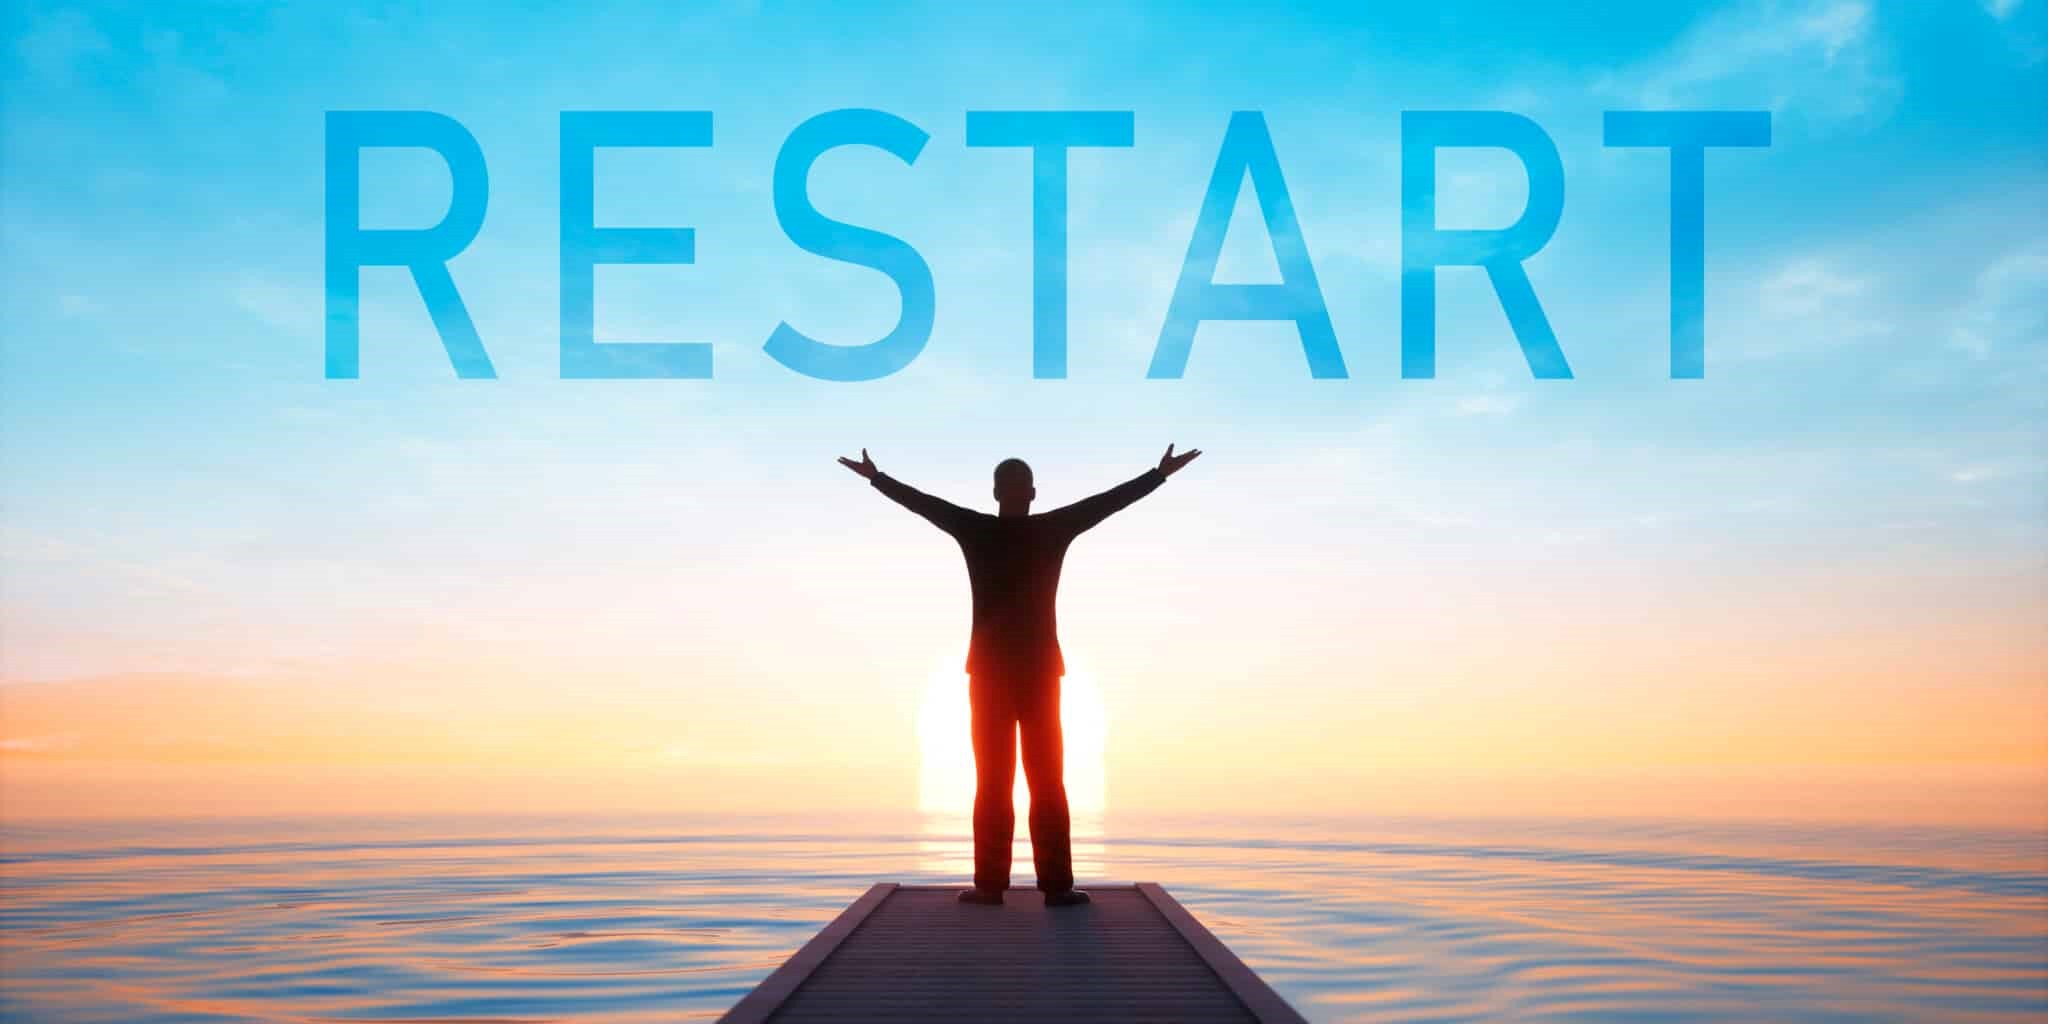 A person standing in front of Restart text in the sky